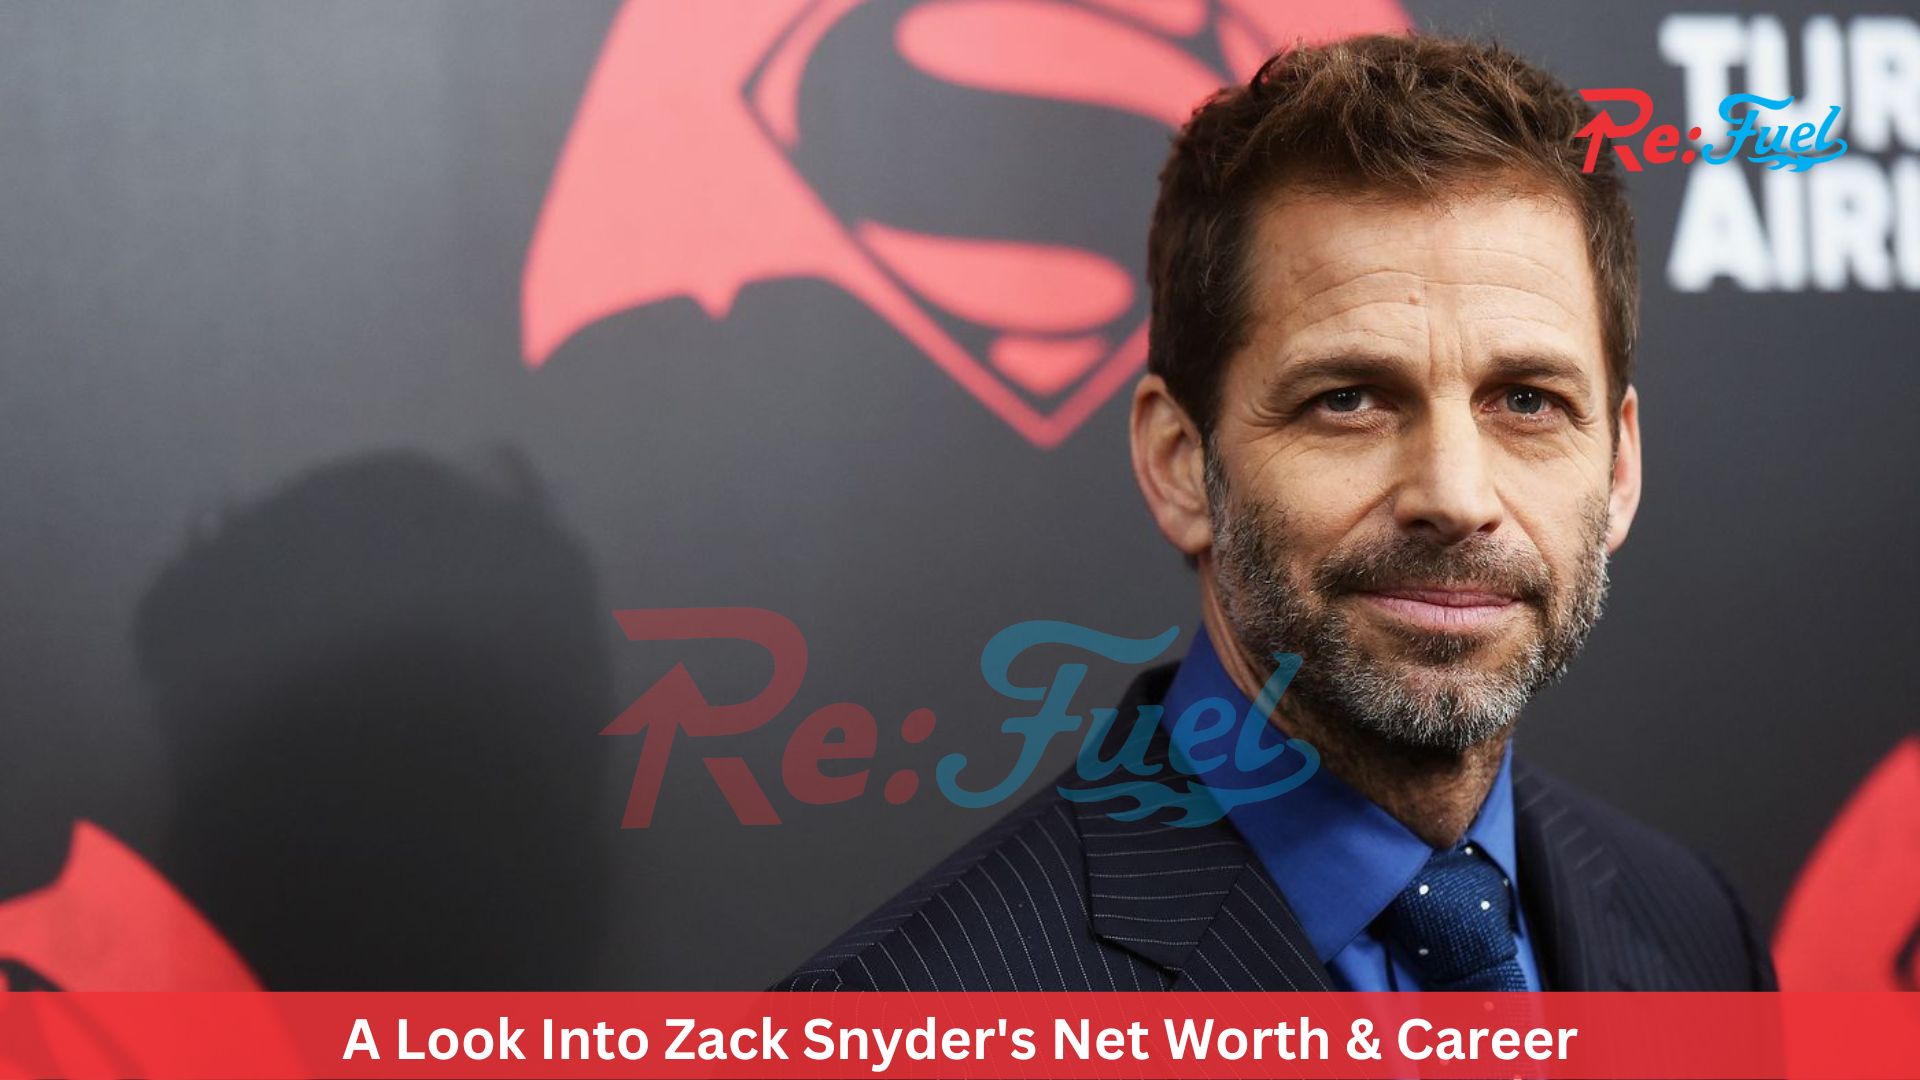 A Look Into Zack Snyder's Net Worth & Career